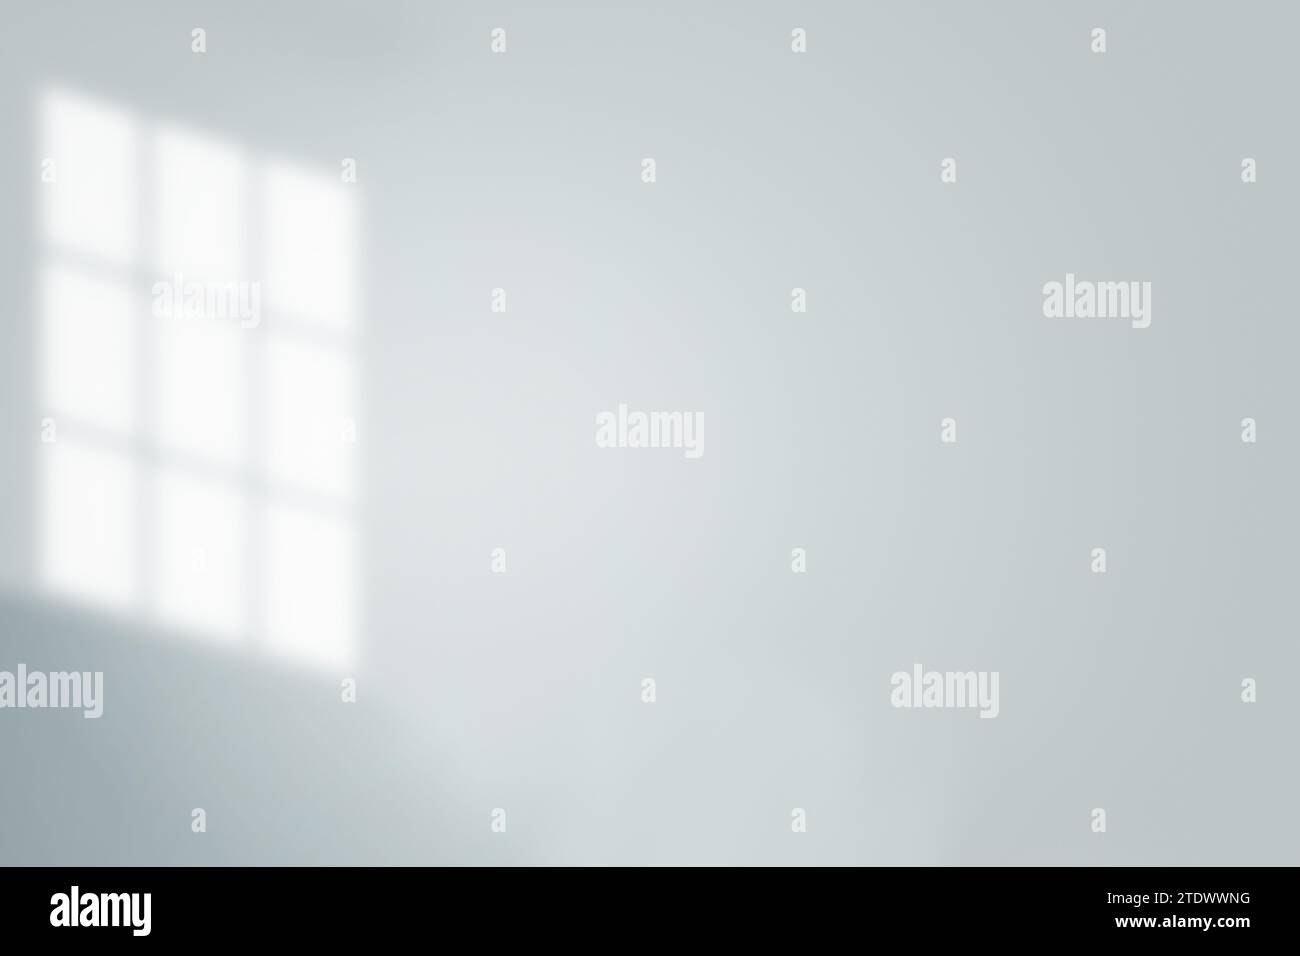 Illuminated lines: a play of sunlight and shadows falling from a window onto a light wall. Stock Photo